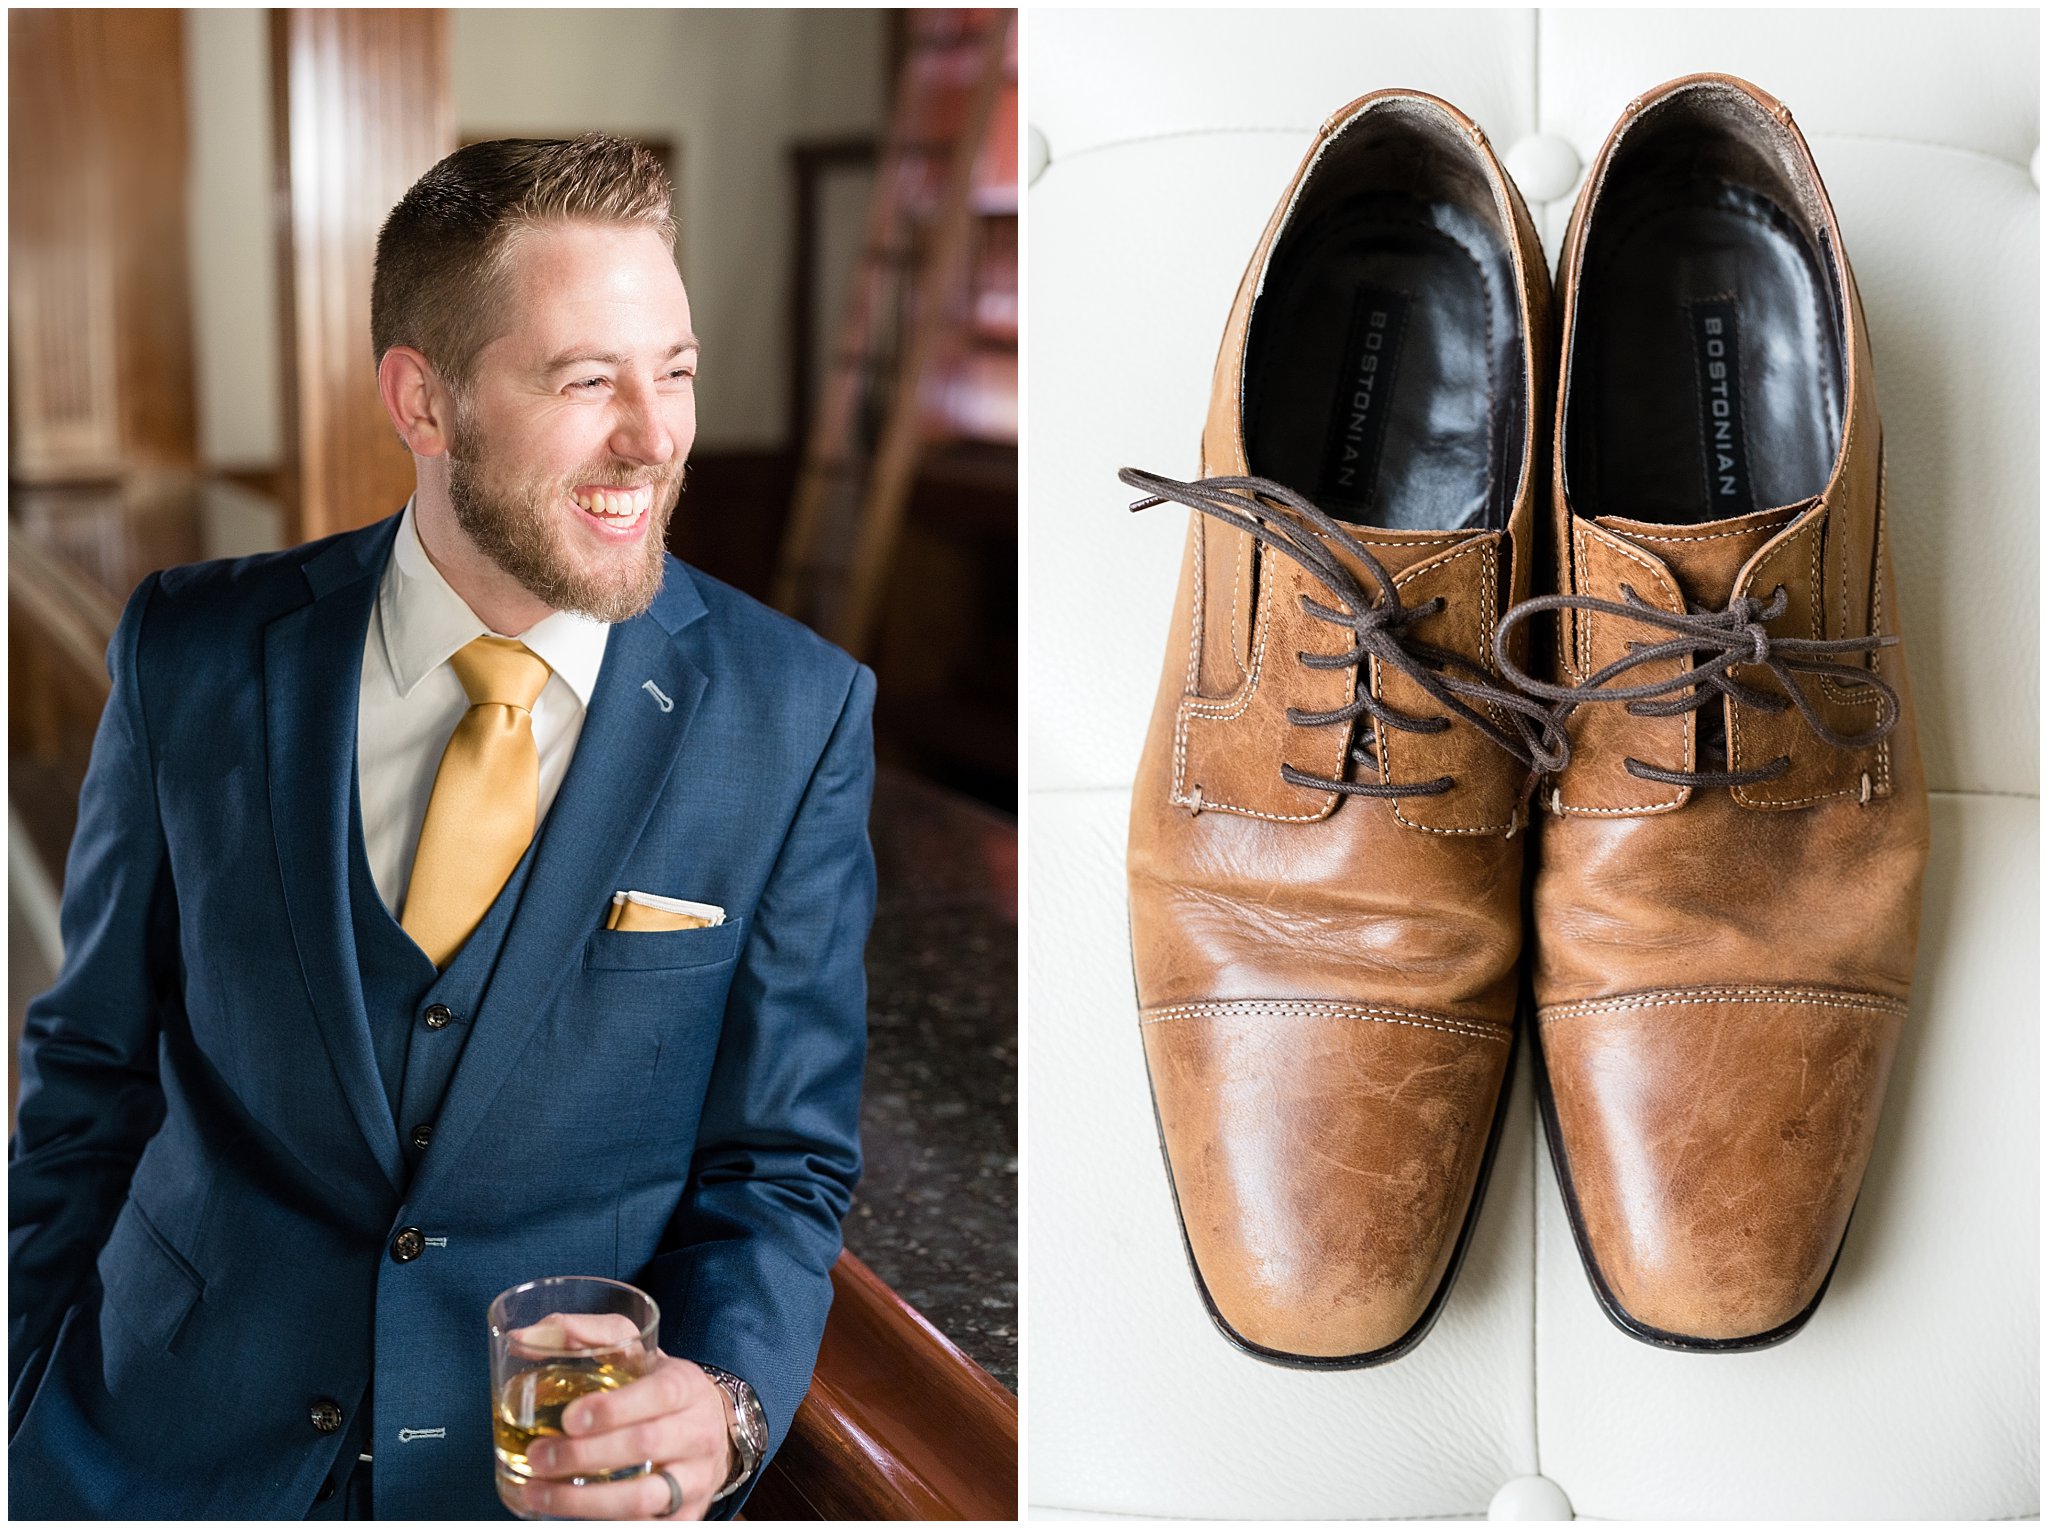 Groom in navy and gold suit with vest standing at a vintage bar | Detail of groom's brown leather shoes | Talia Event Center